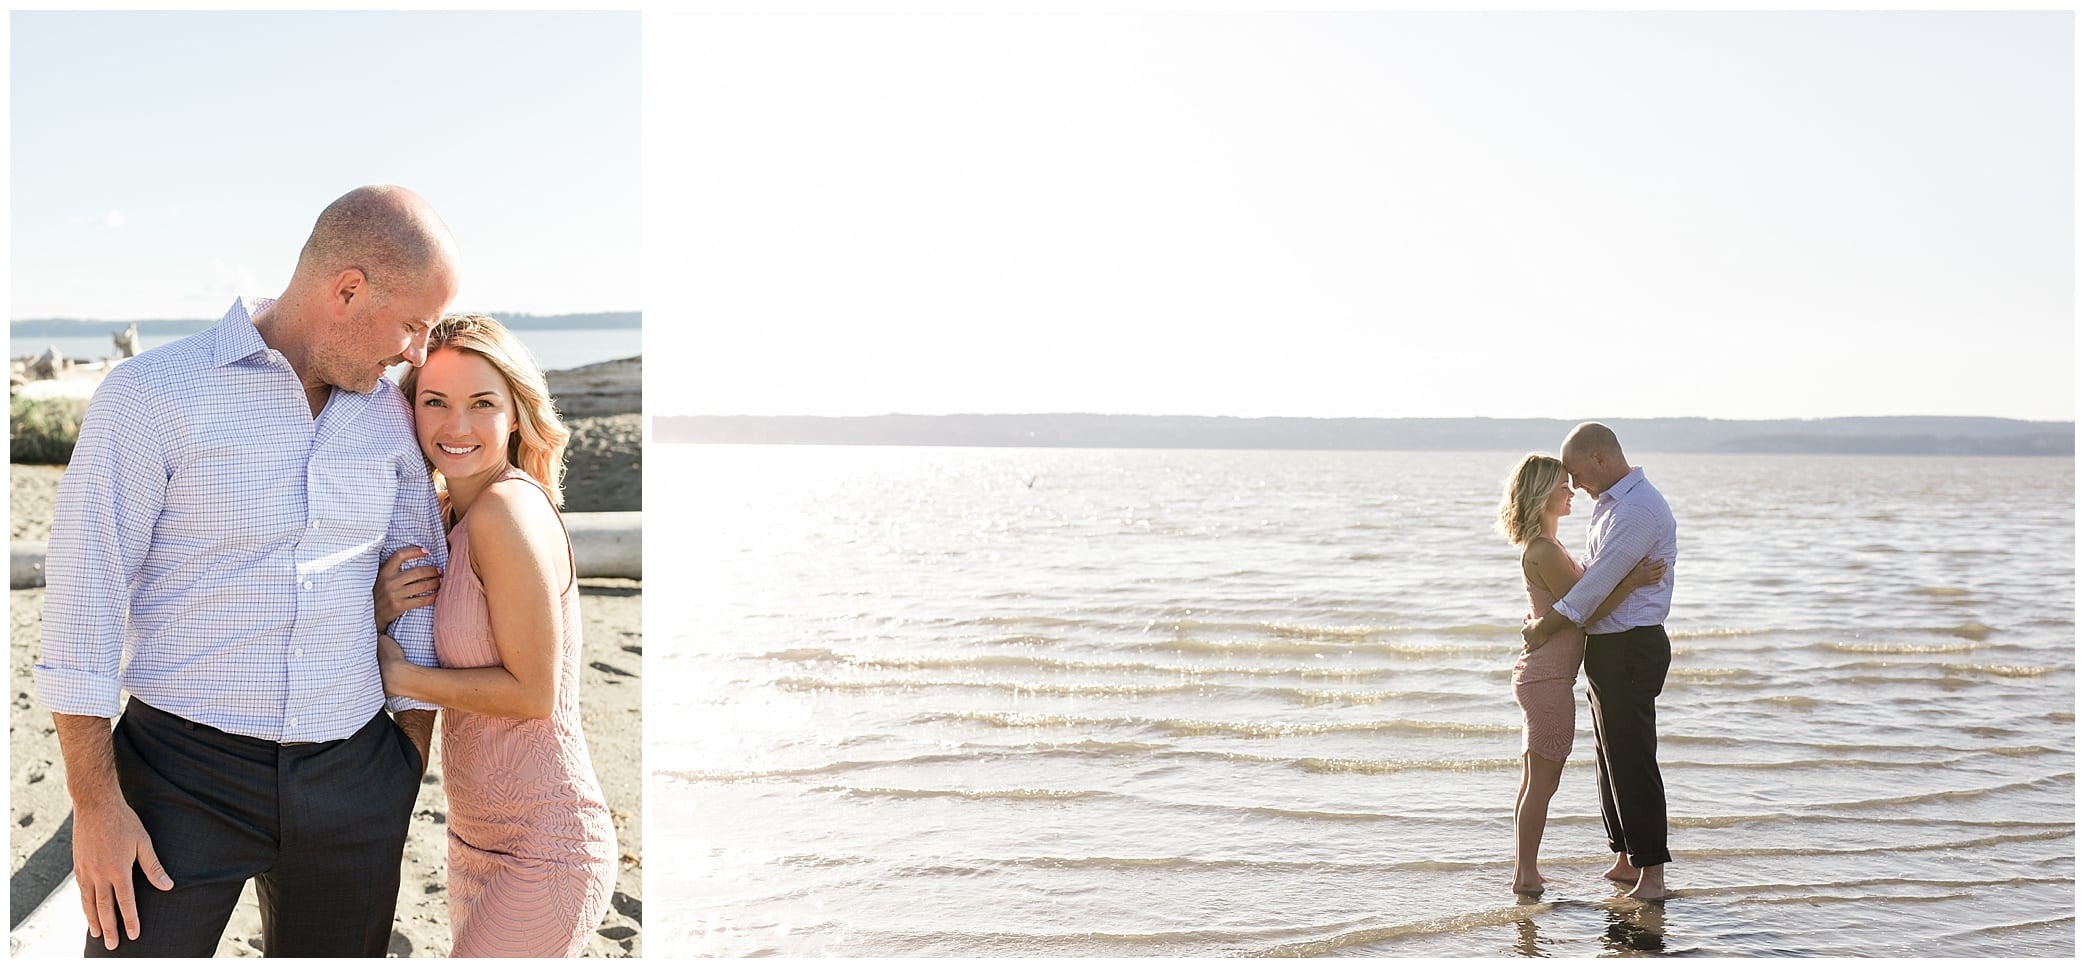 seattle waterfront engagements, seattle engagements, seattle engagement photographer